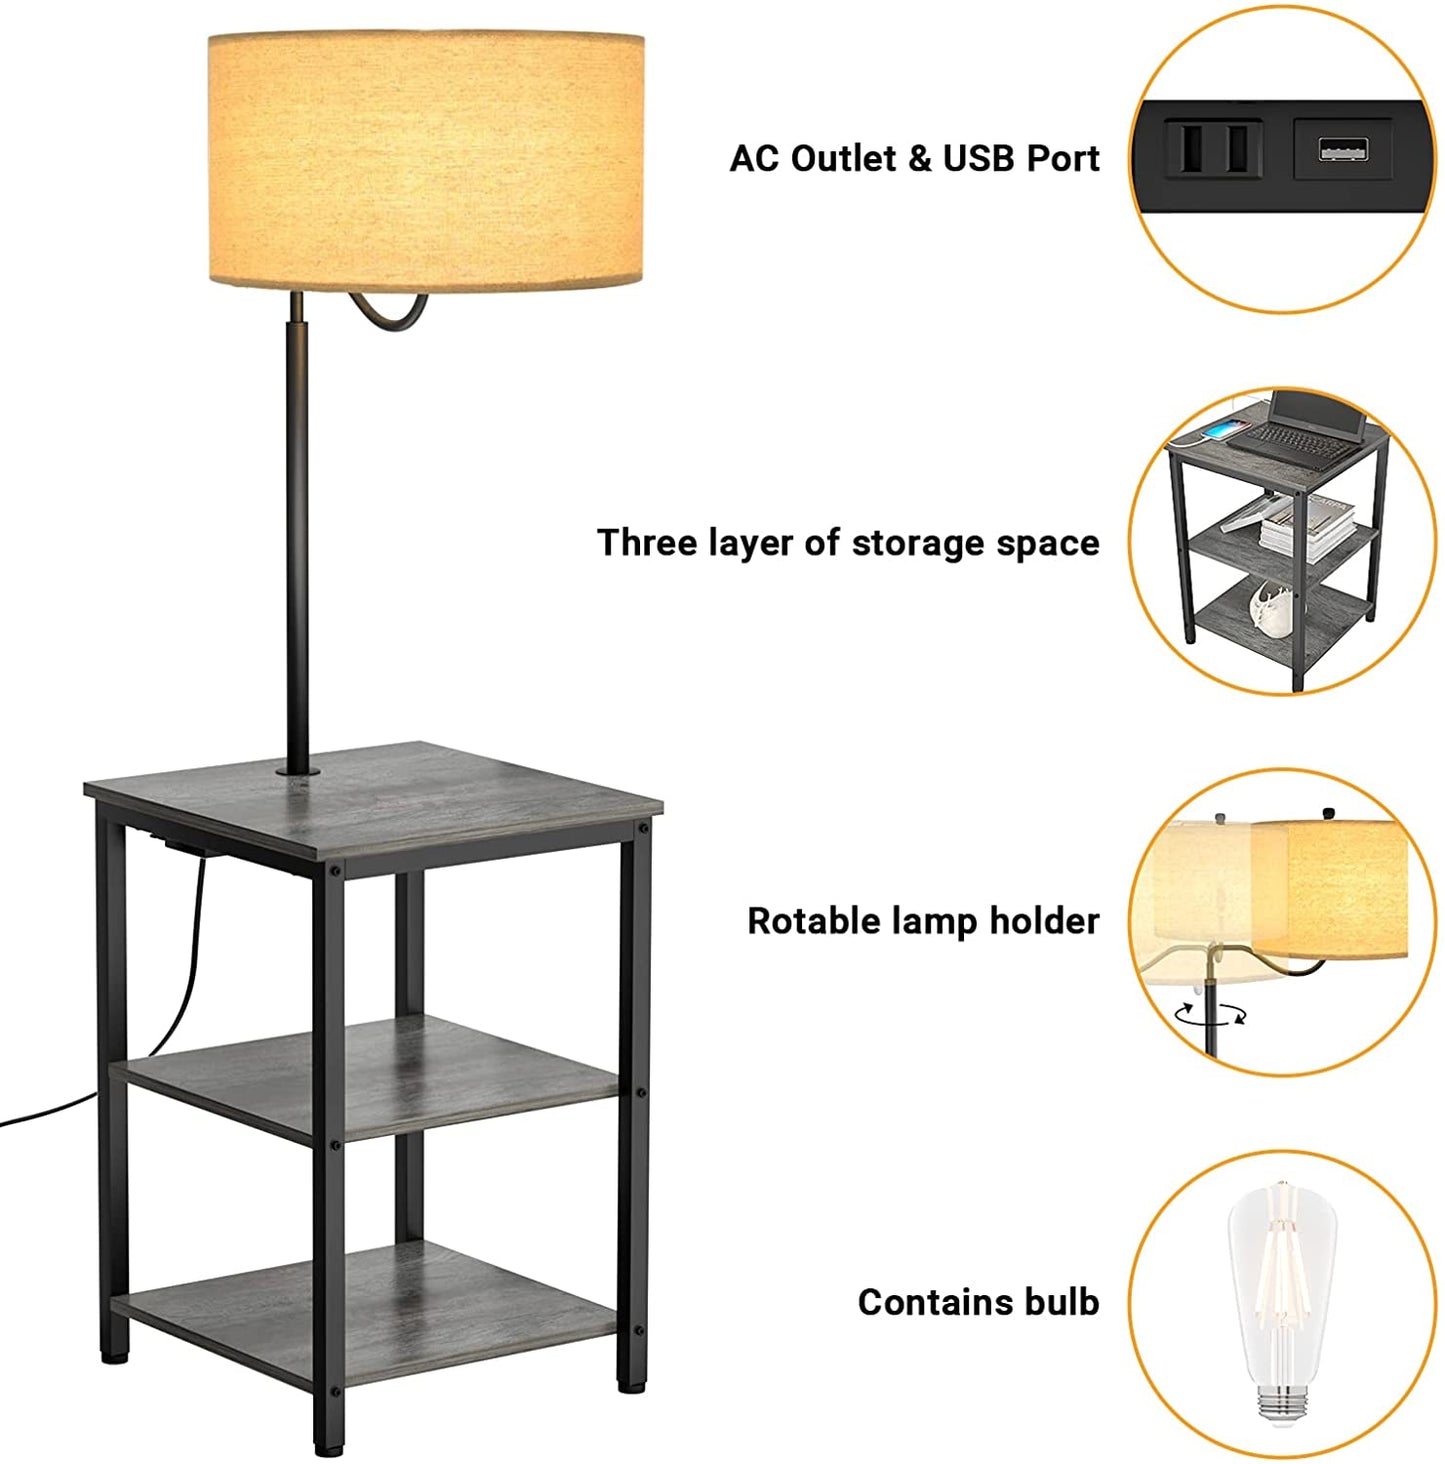 AntLux Floor Lamp with Side Table - USB Charging Port, Power Outlet, End Table and Lamp, Modern Bedside Nightstand with Industrial Floor Light for Living Room, Bedroom, Edison LED Bulb, Gray